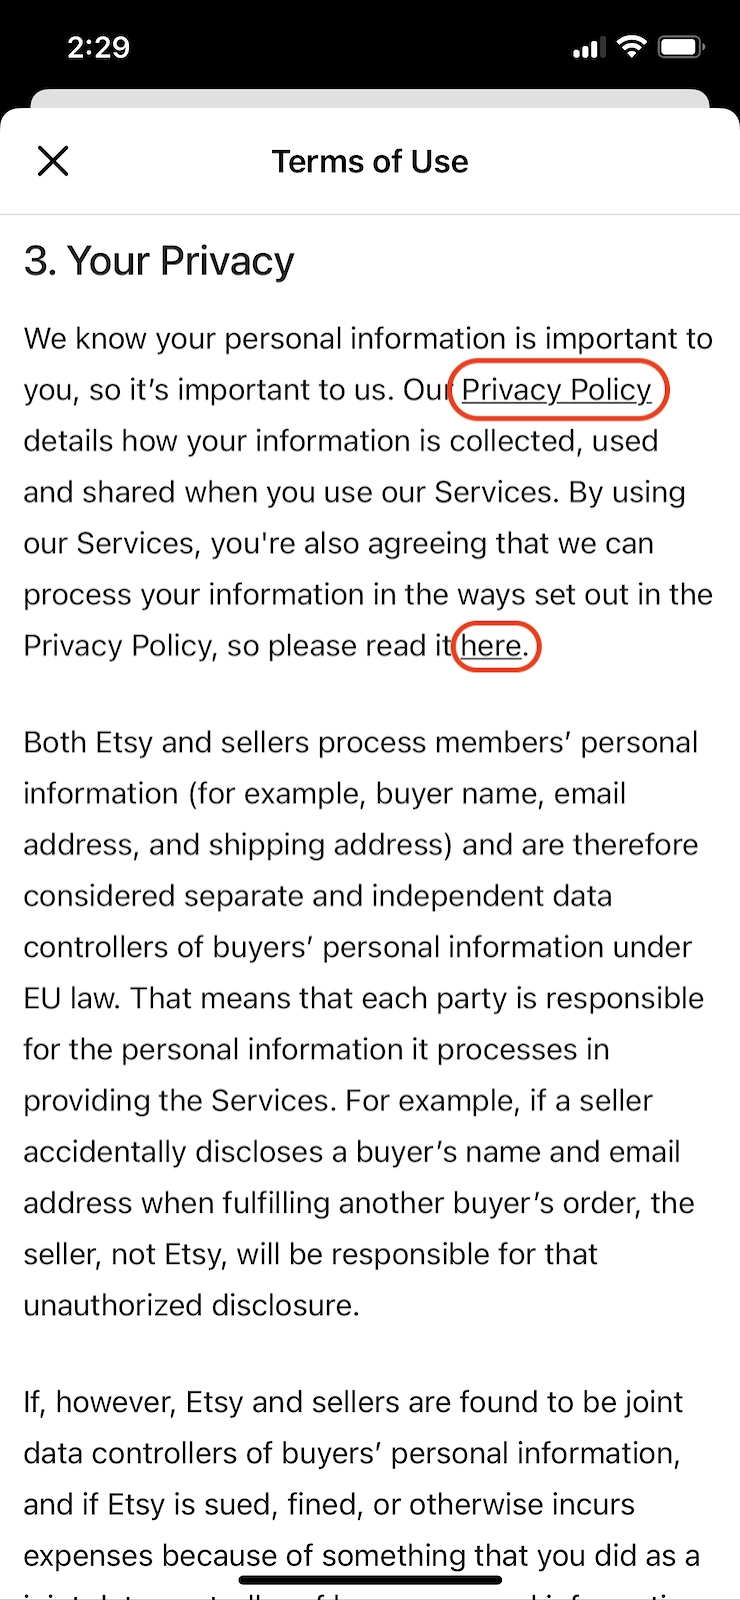 Etsy-terms-and-conditions-privacy clause